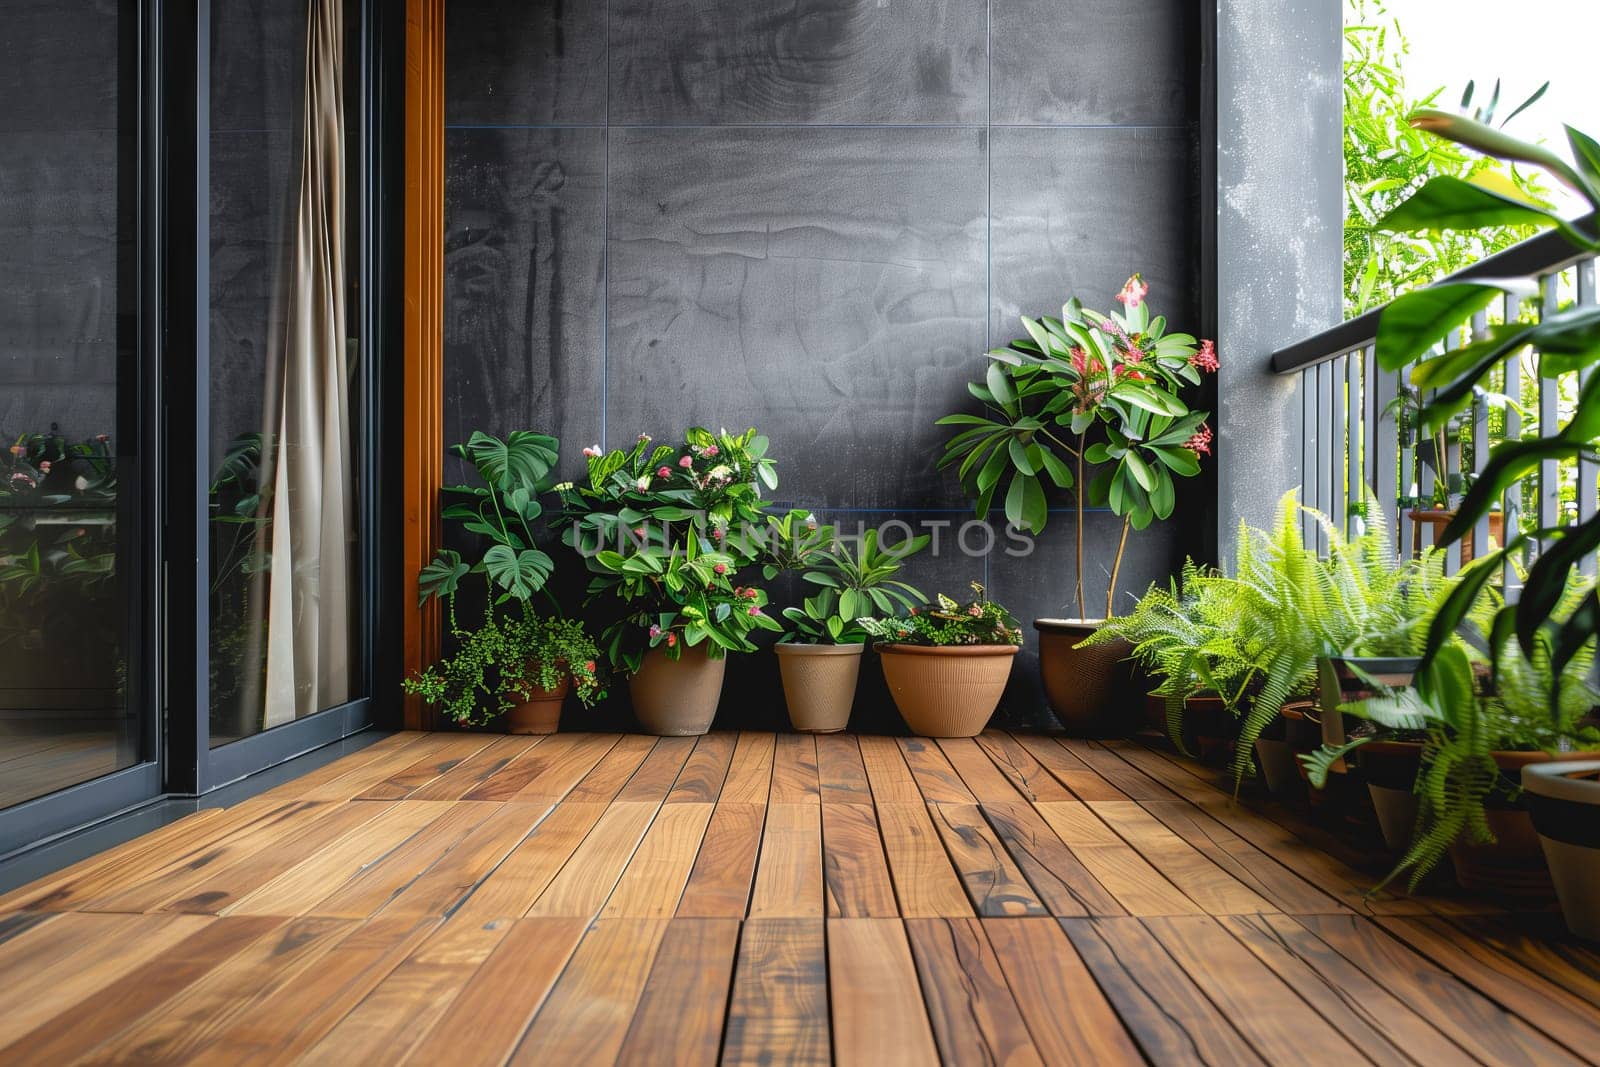 A wooden deck adorned with potted plants, enhancing the building exterior. The rectangular fixture complements the window and wood flooring